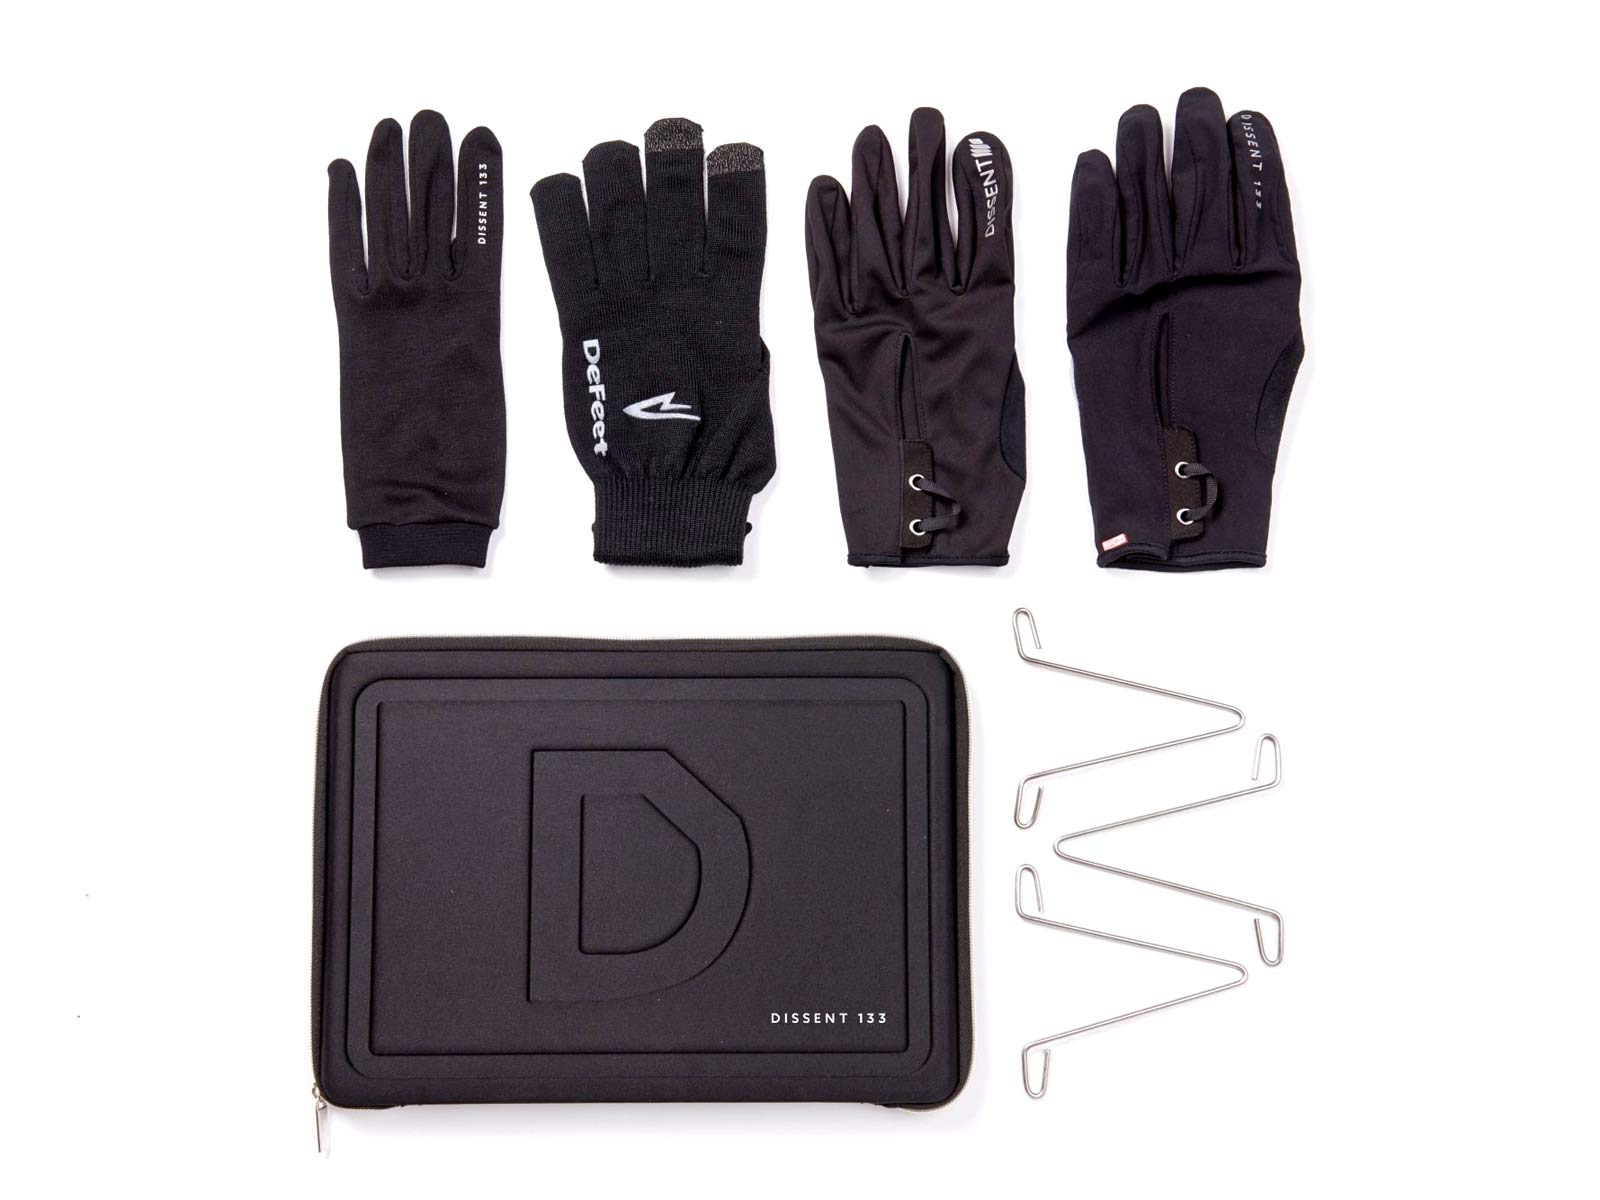 Dissent 133 by TheRiderFirm layered winter biking gloves wet cold cycling glove system Ultimate Pack four glove system